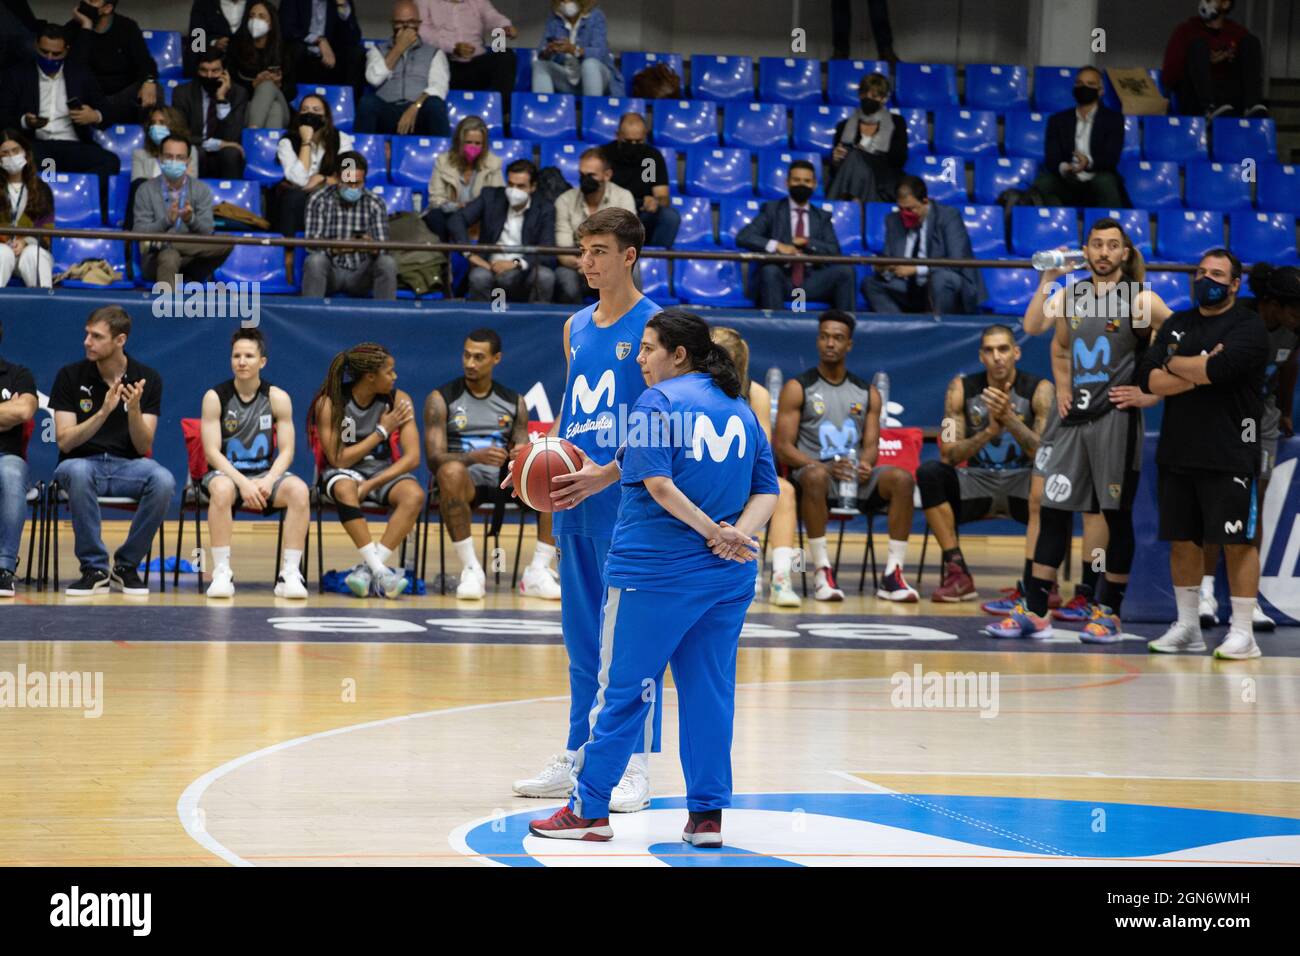 MADRID, SPAIN - 22 SEPTEMBER 2021: Nora Martins Villarino, player of the inclusive quarry of Movistar Estudiantes with Alex Montero, player of the male subsidiary of the EBA league.  Credit: Oscar Ribas Torres/Medialys Images/Alamy Live News Stock Photo